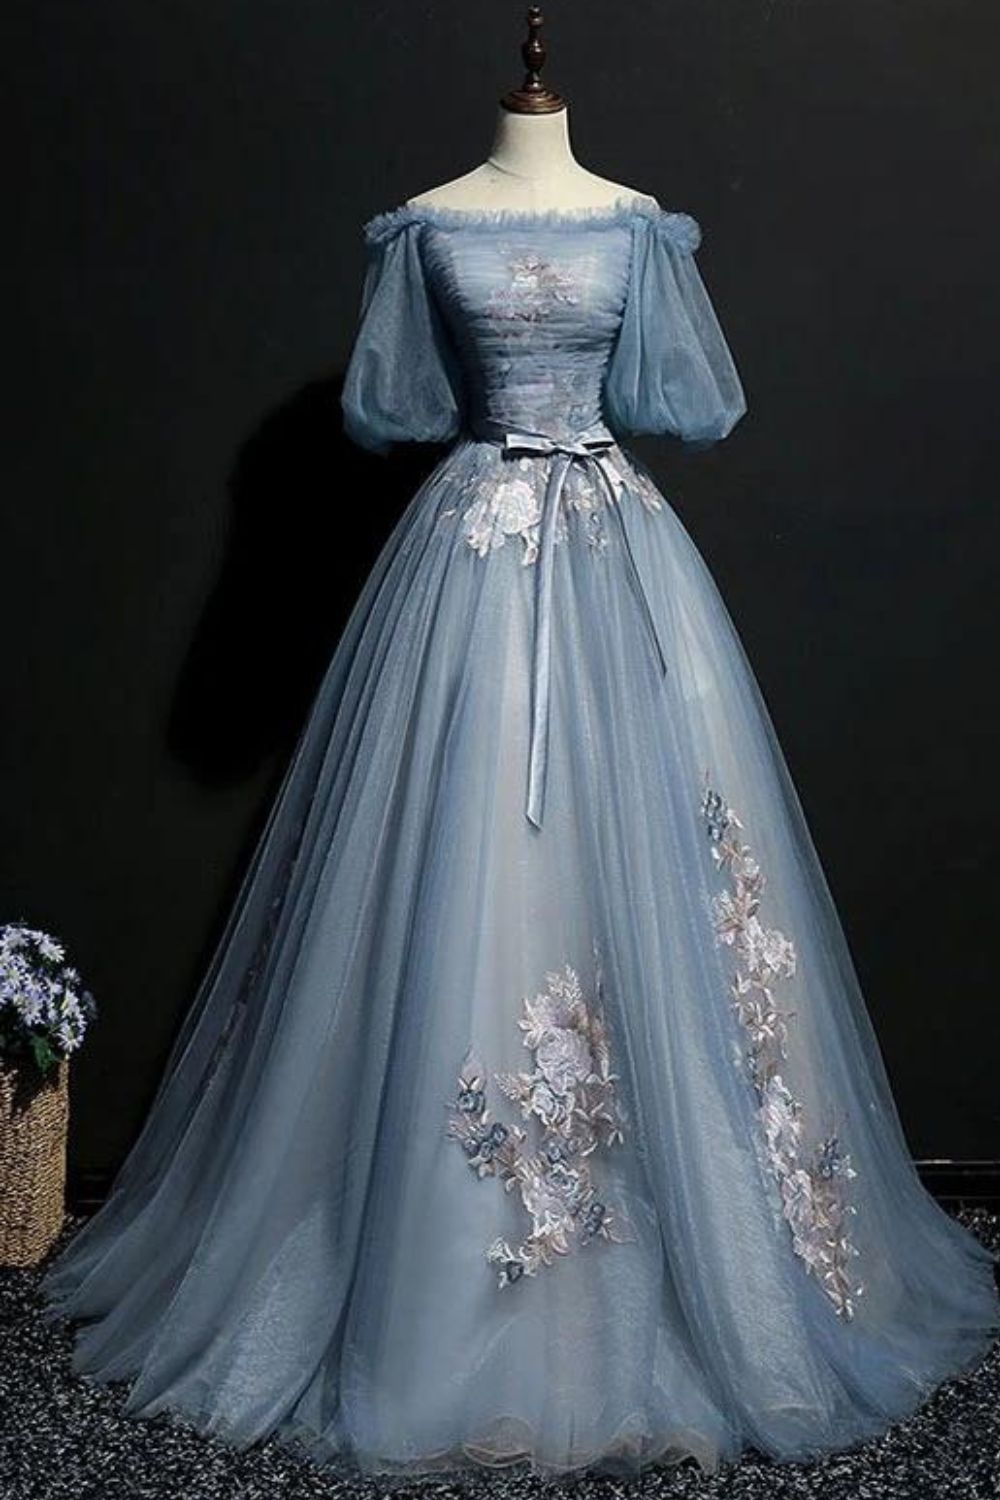 Unique Puffy Off The Shoulder Half Sleeves Long Prom Dresses With Appliques, Tulle Evening Dresses